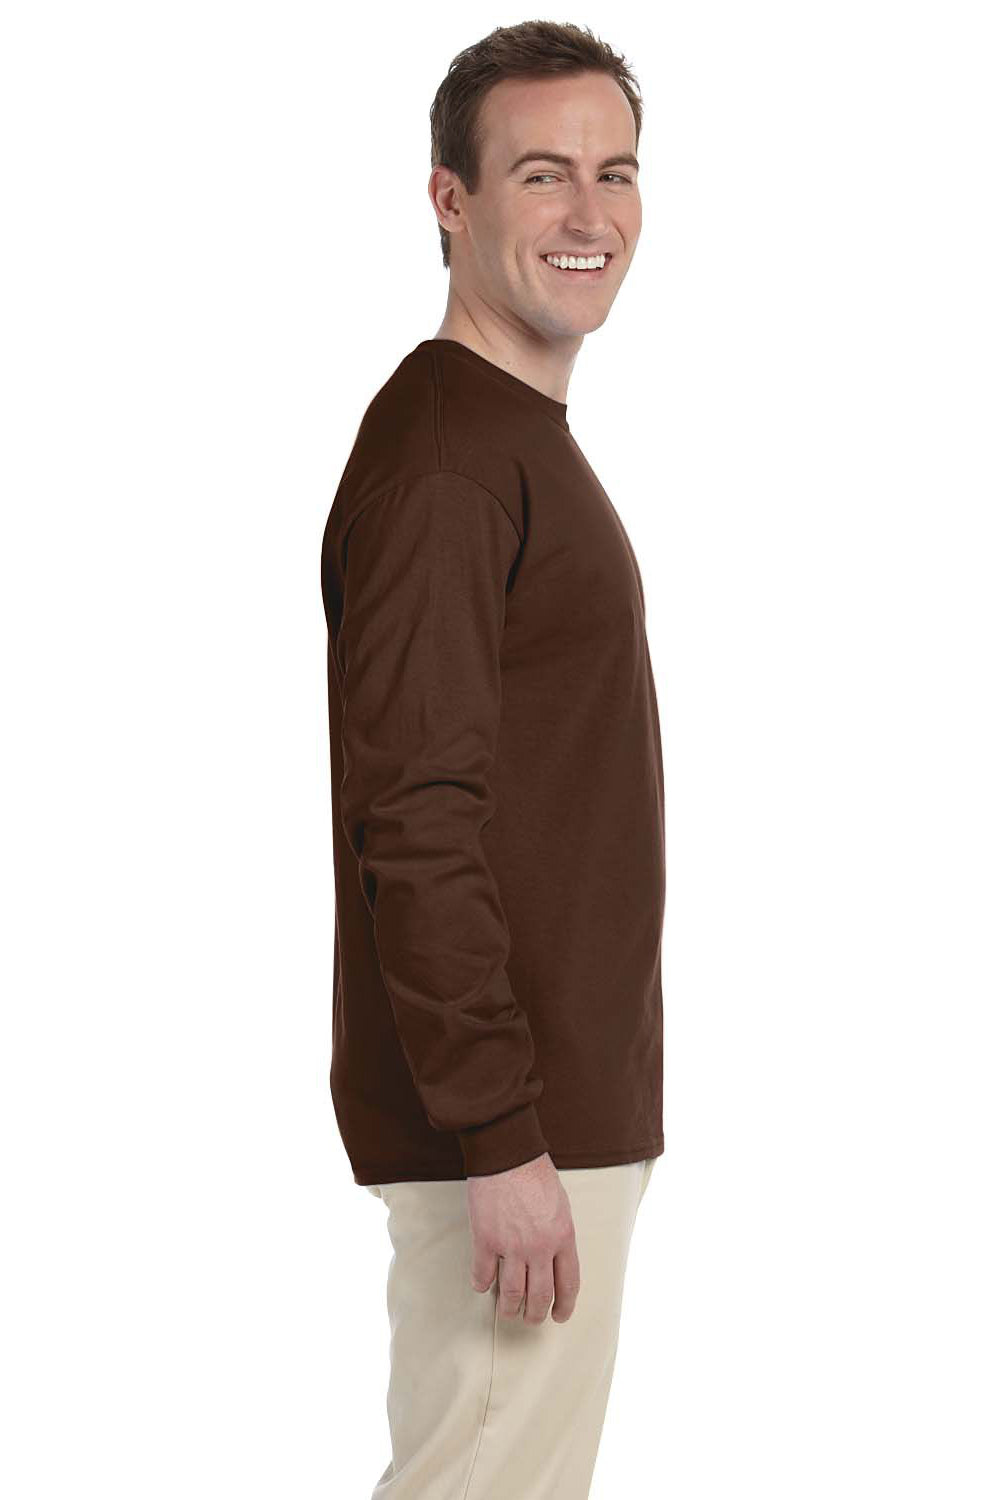 Fruit Of The Loom 4930 Mens HD Jersey Long Sleeve Crewneck T-Shirt Chocolate Brown Side